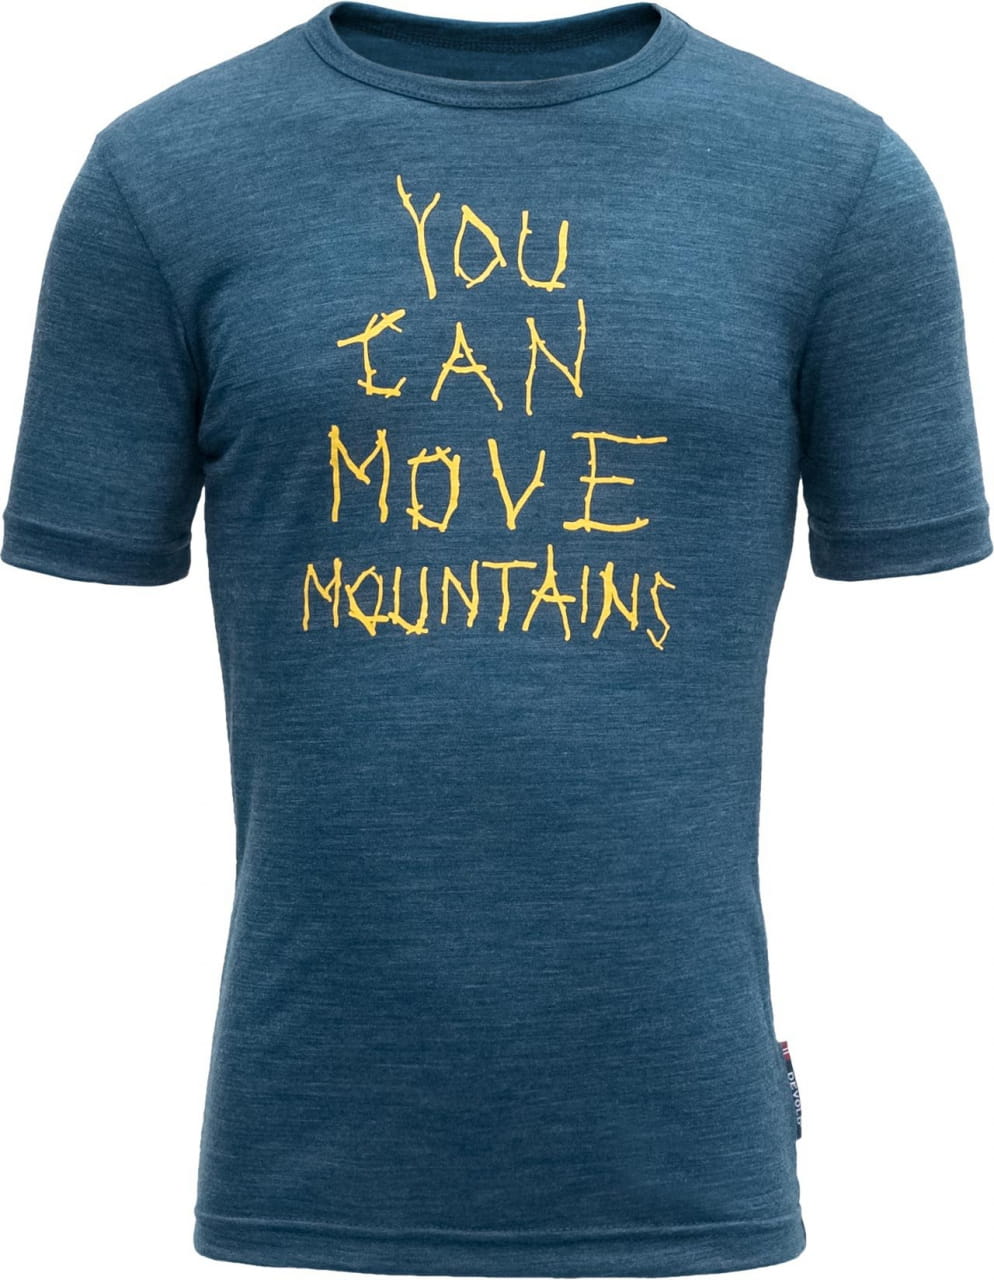 T-Shirts Devold Moving Mountain Kid Tee